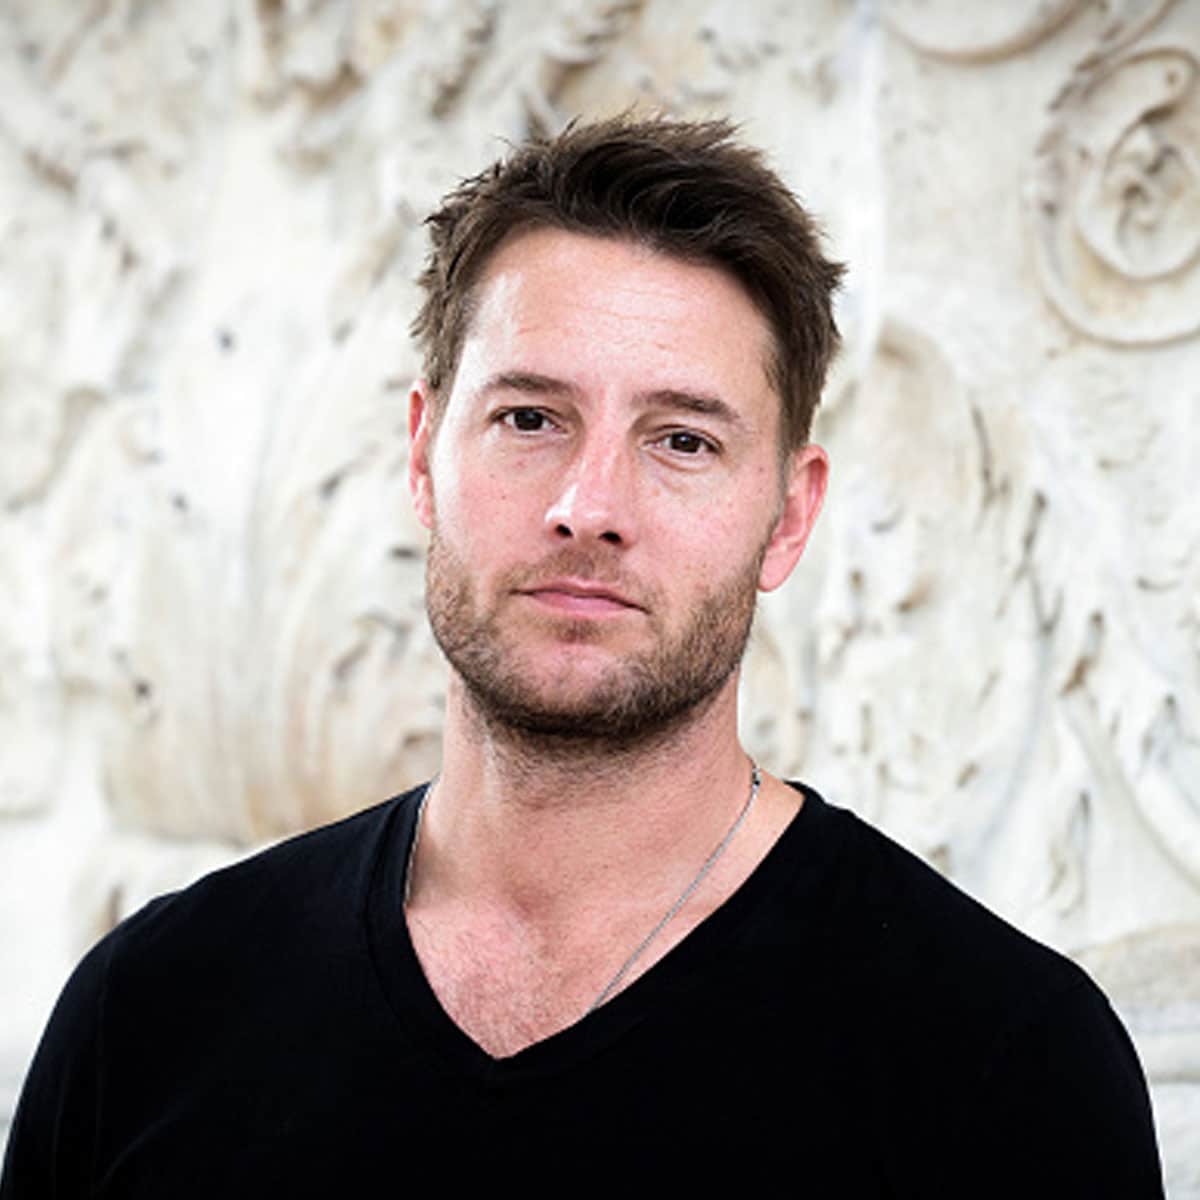 Justin Hartley poses during "Filming Italy: Il Cinema Incontra L'Arte"